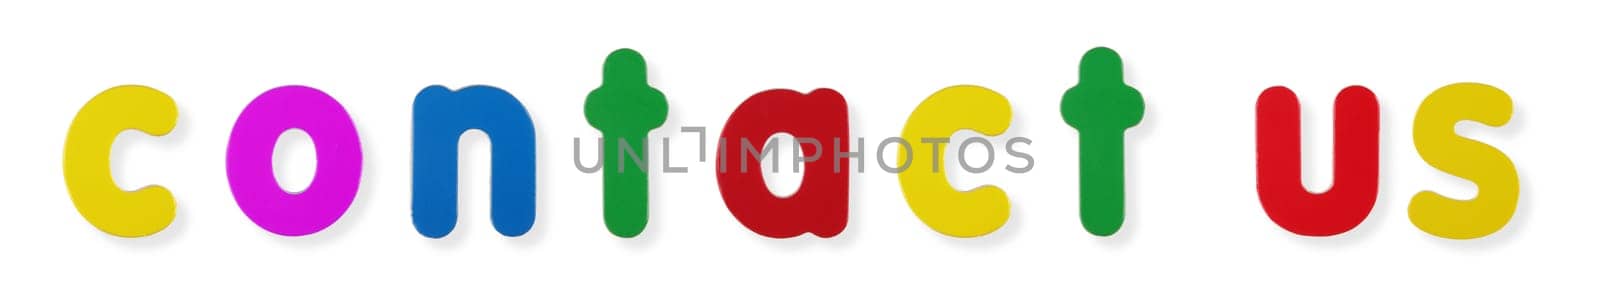 contact us words in coloured magnetic letters on white with clipping path to remove shadow